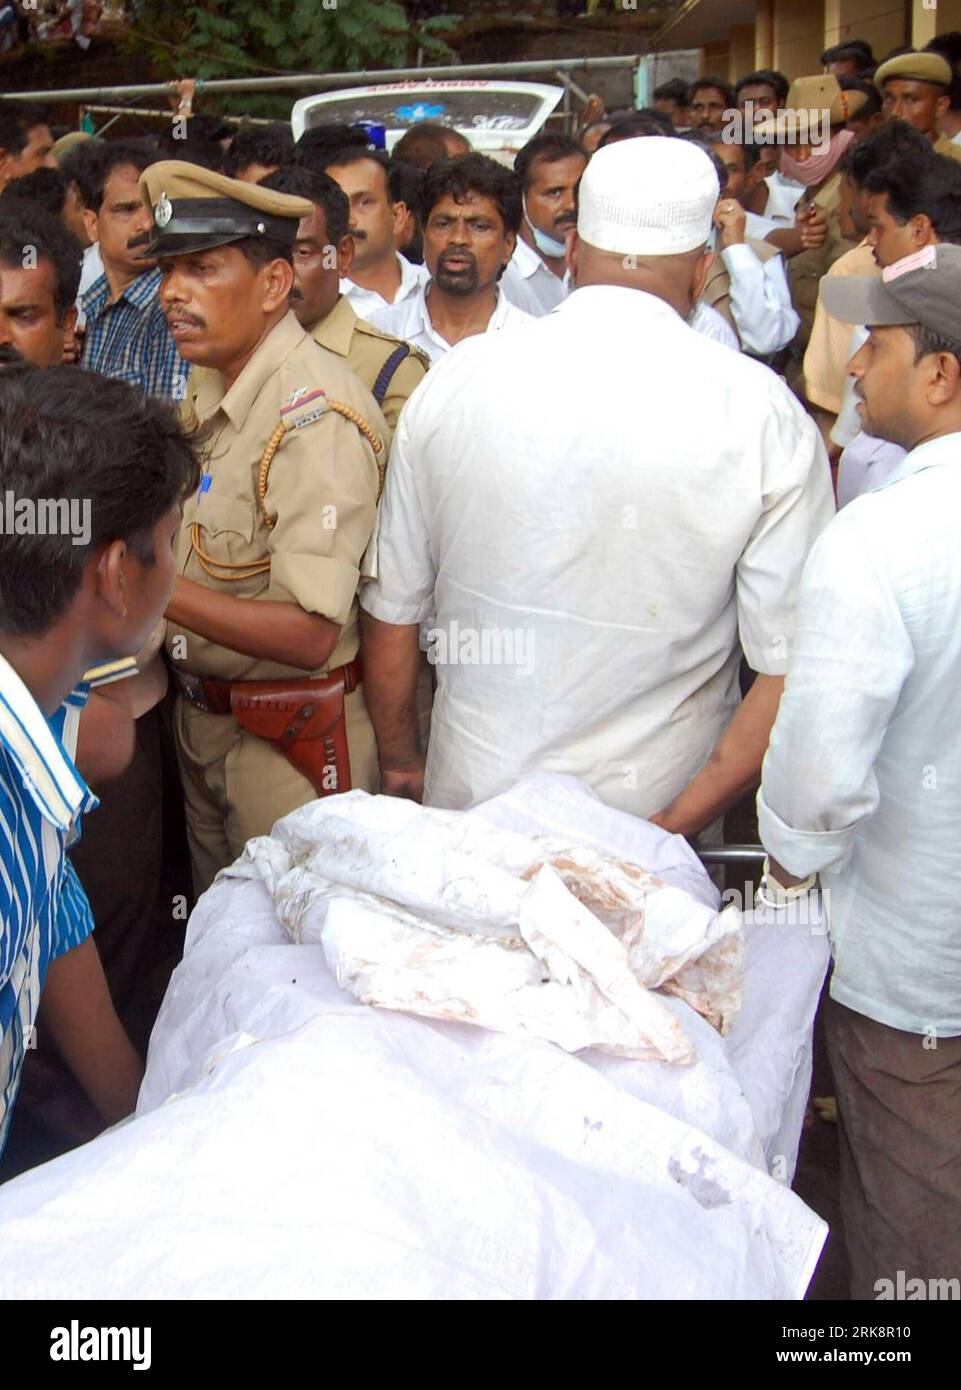 Bildnummer: 54068842  Datum: 22.05.2010  Copyright: imago/Xinhua (100522) -- MANGALORE, May 22, 2010 (Xinhua) -- The body of a victim in a plane crash is carried to a hospital for identification in the southern Indian city of Mangalore, May 22, 2010. A total of 158 of all 166 on board the plane of Air India Express were confirmed dead in the crash when it was landing at an airport in Mangalore early Saturday. The plane was flying from Dubai of the United Arab Emirates to Mangalore. (Xinhua) (ypf) (2)INDIA-MANGALORE-PLANE CRASH-VICTIM-IDENTIFICATION PUBLICATIONxNOTxINxCHN Indien Unglück Flugzeu Stock Photo